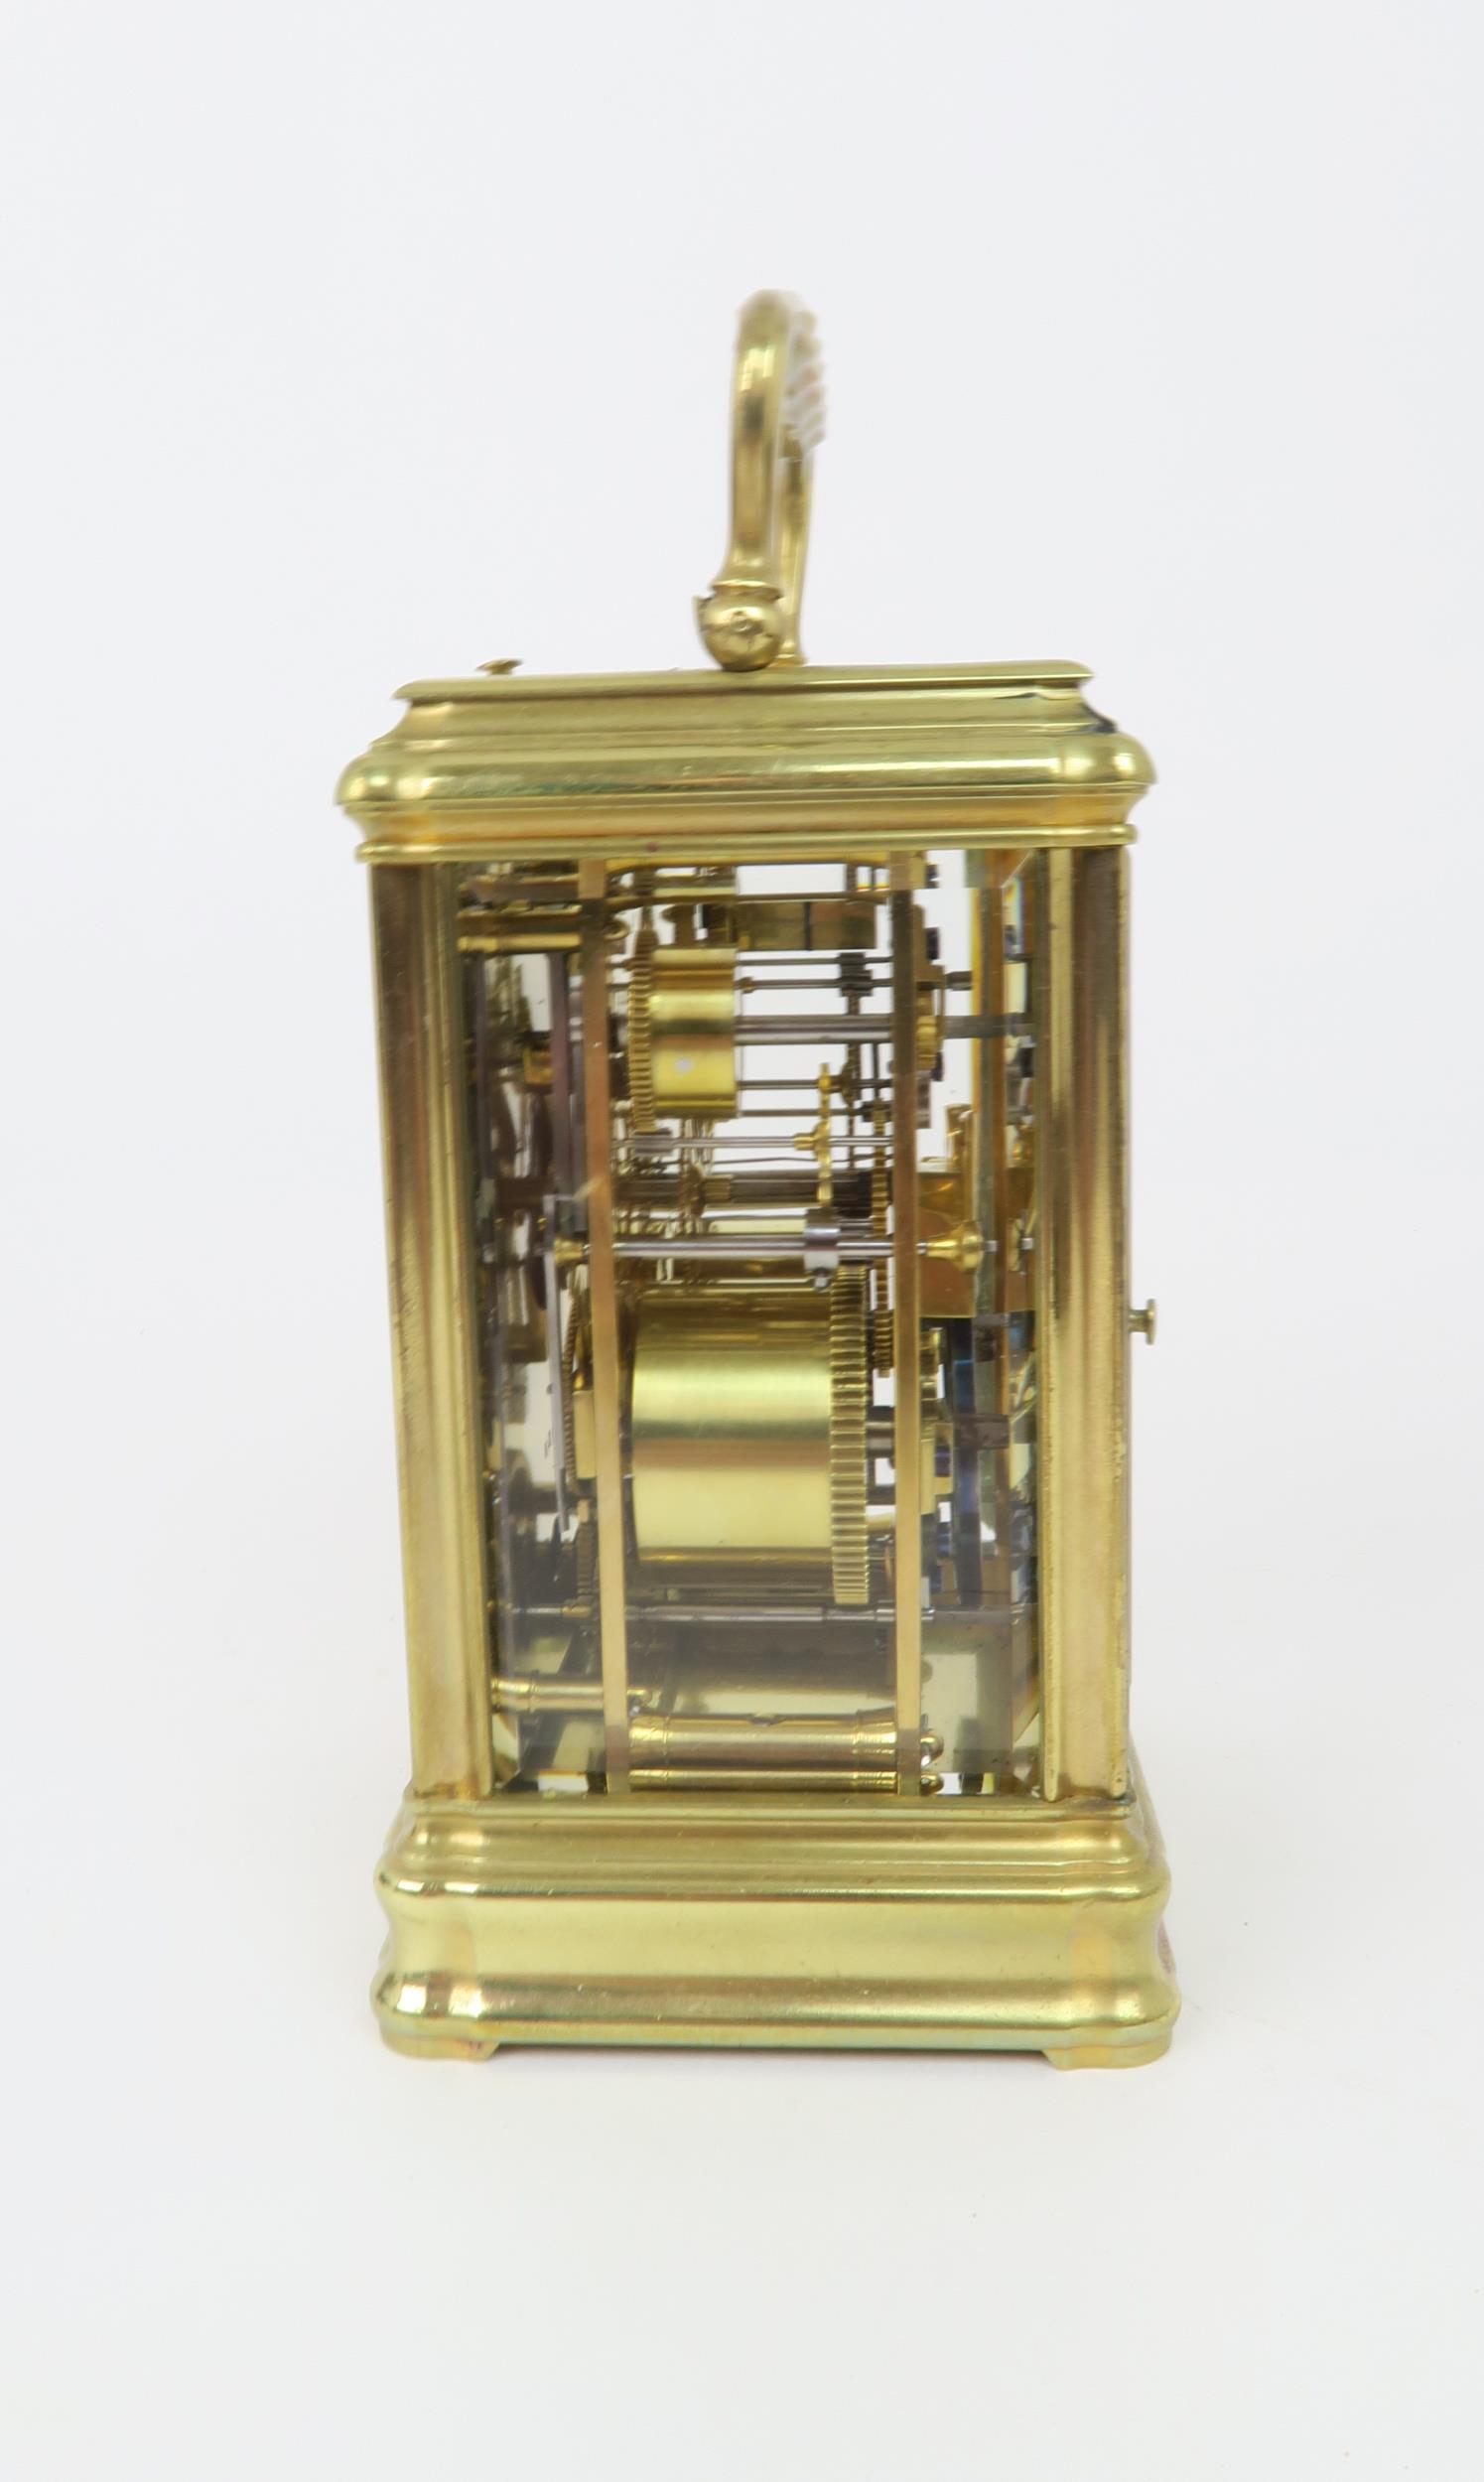 A FRENCH BRASS AND GLASS REPEATING CARRIAGE CLOCK by Drocourt for J. W. Benson, London with striking - Image 2 of 5